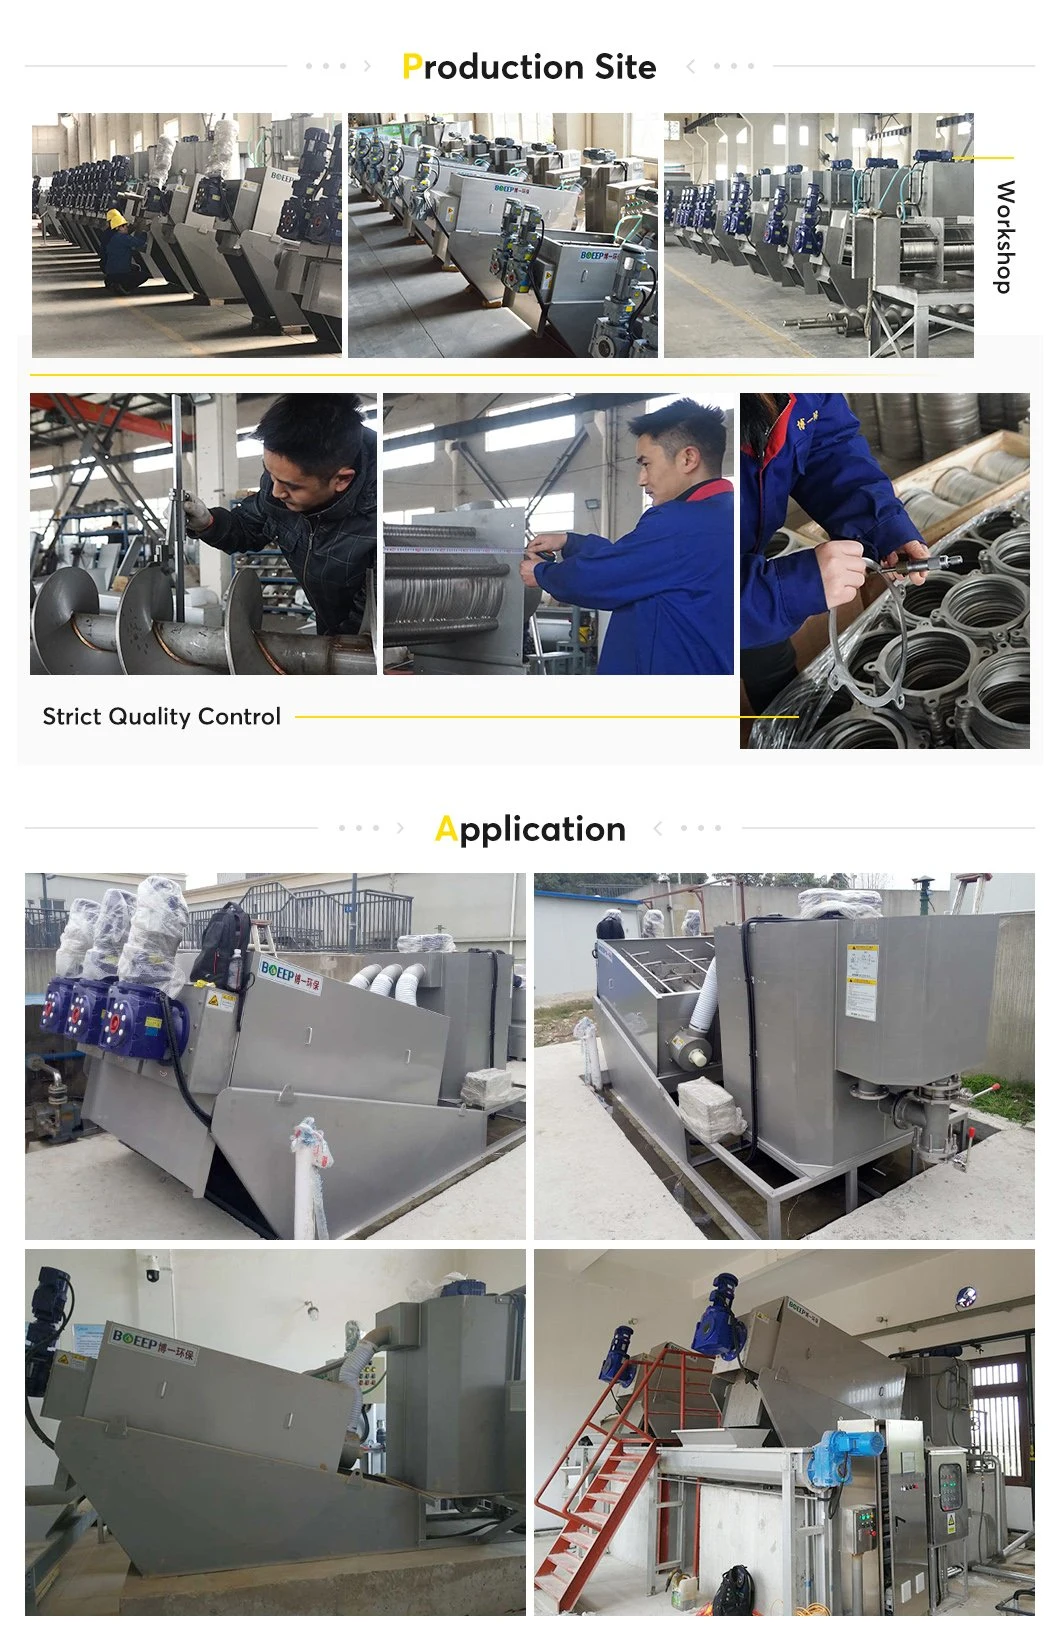 Industrial Wastewater Treatment Plant and Pre-Thickening Screw Press Sludge Dewatering